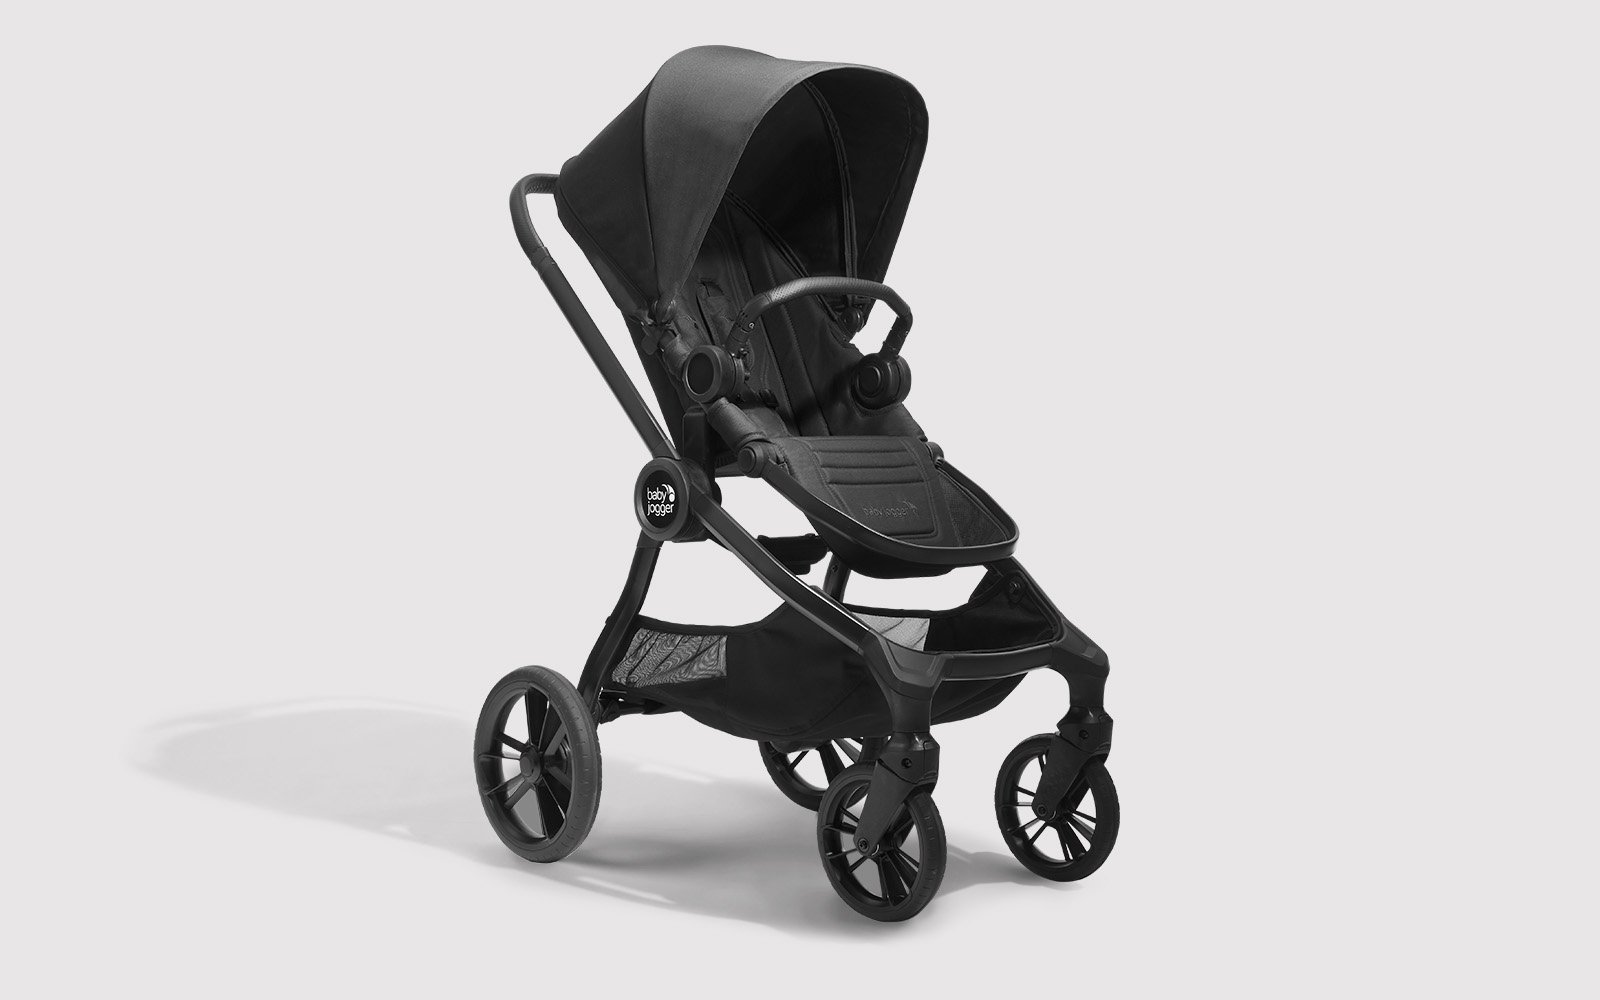 Baby Jogger Stroller Review: A Comprehensive Analysis